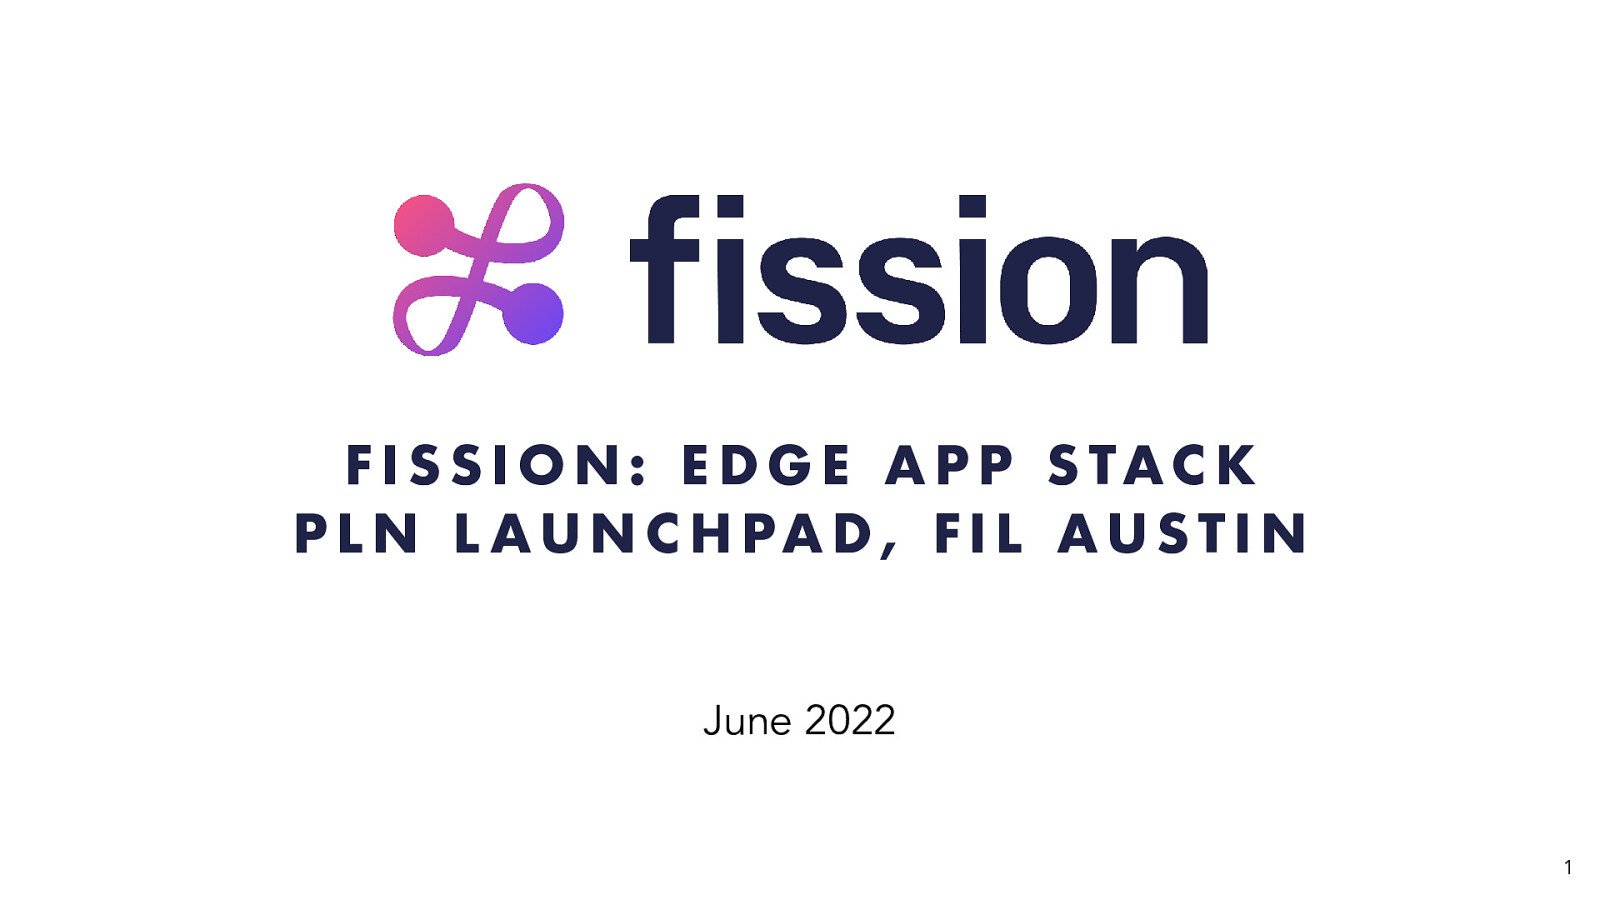 Fission Overview for PLN Launchpad